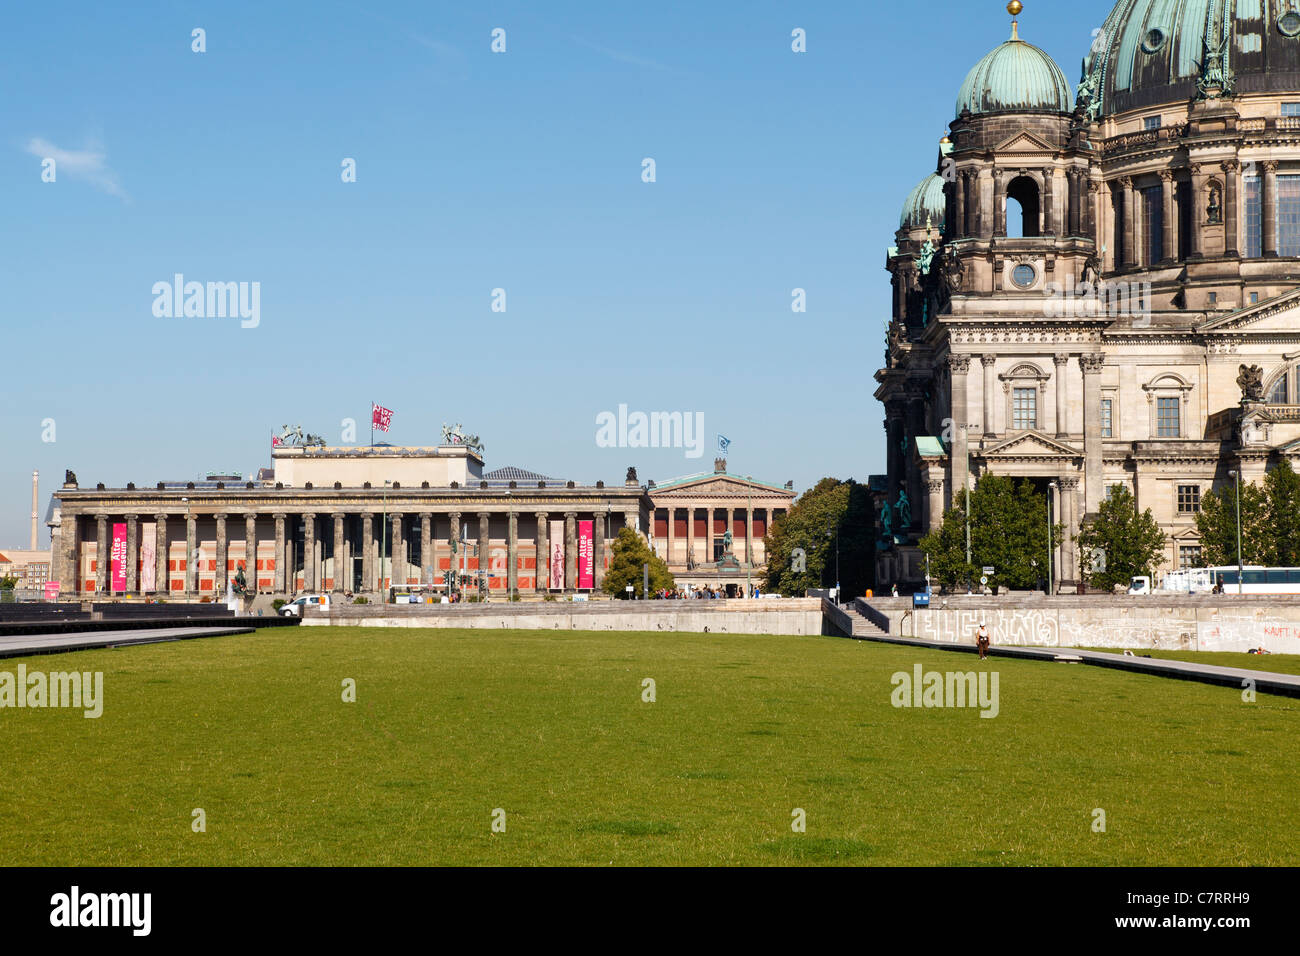 Museum Island from Schlossplatz, with Berliner Dom, Alte Nationalgalerie and Altes Museum, Berlin, Germany Stock Photo